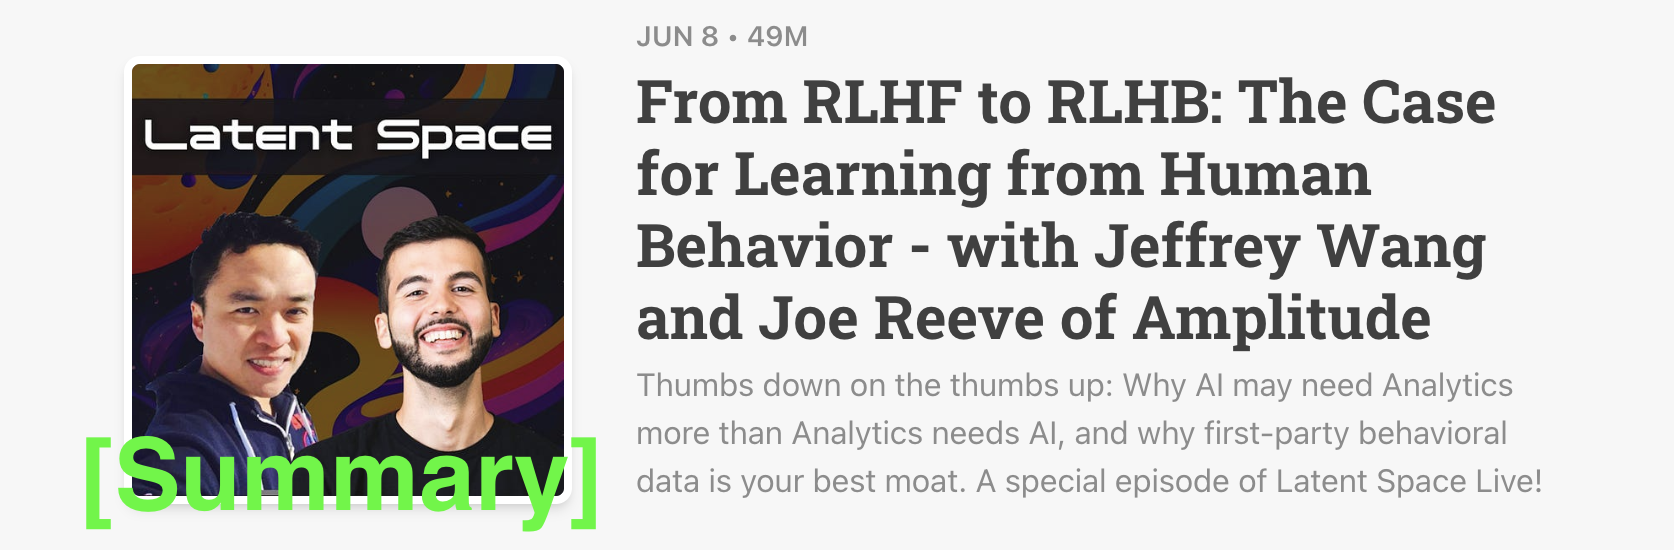 Latent Space Podcast 6/8/23 [Summary] - From RLHF to RLHB: The Case for Learning from Human Behavior - with Jeffrey Wang and Joe Reeve of Amplitude